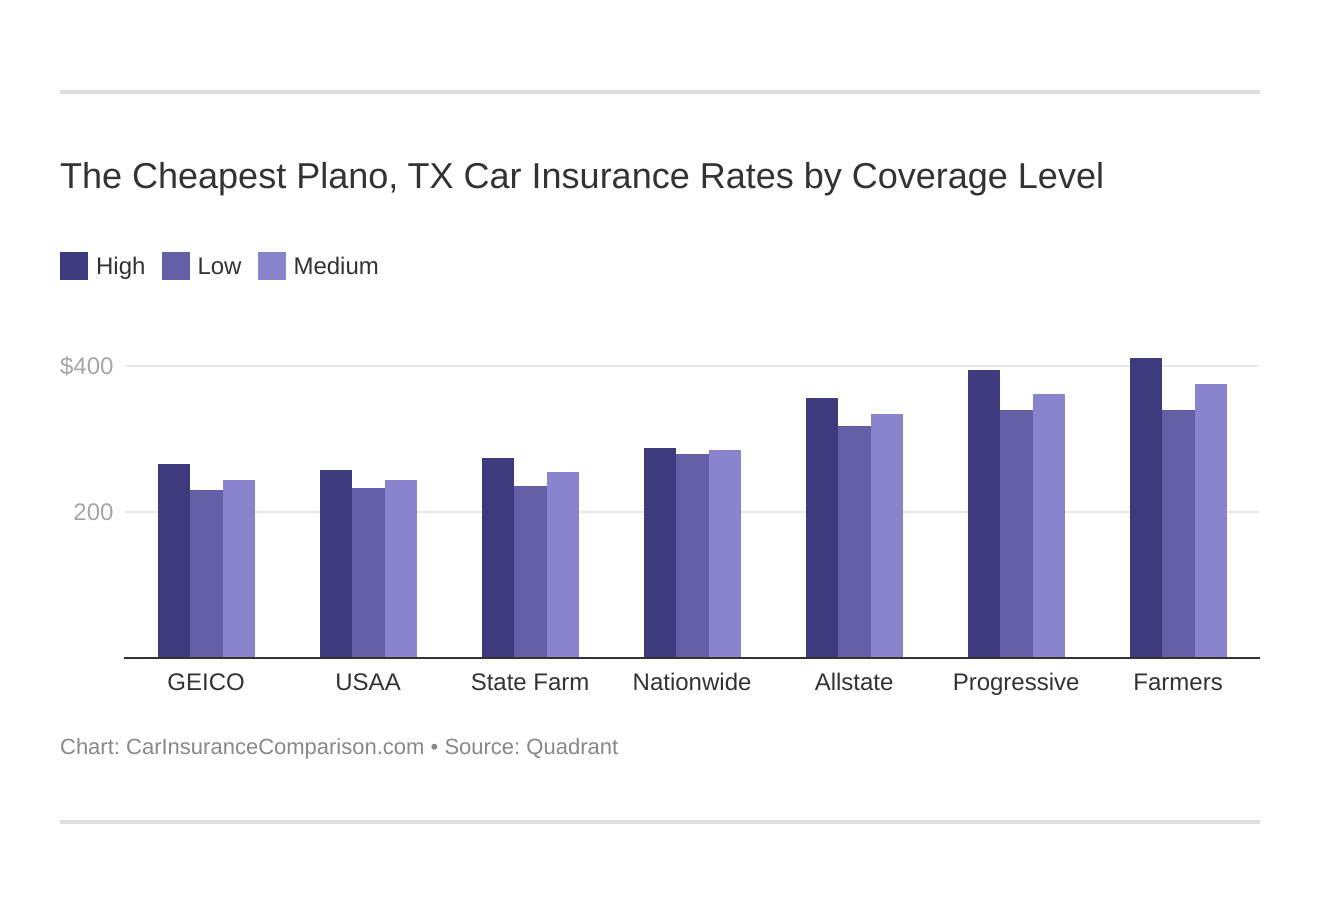 The Cheapest Plano, TX Car Insurance Rates by Coverage Level